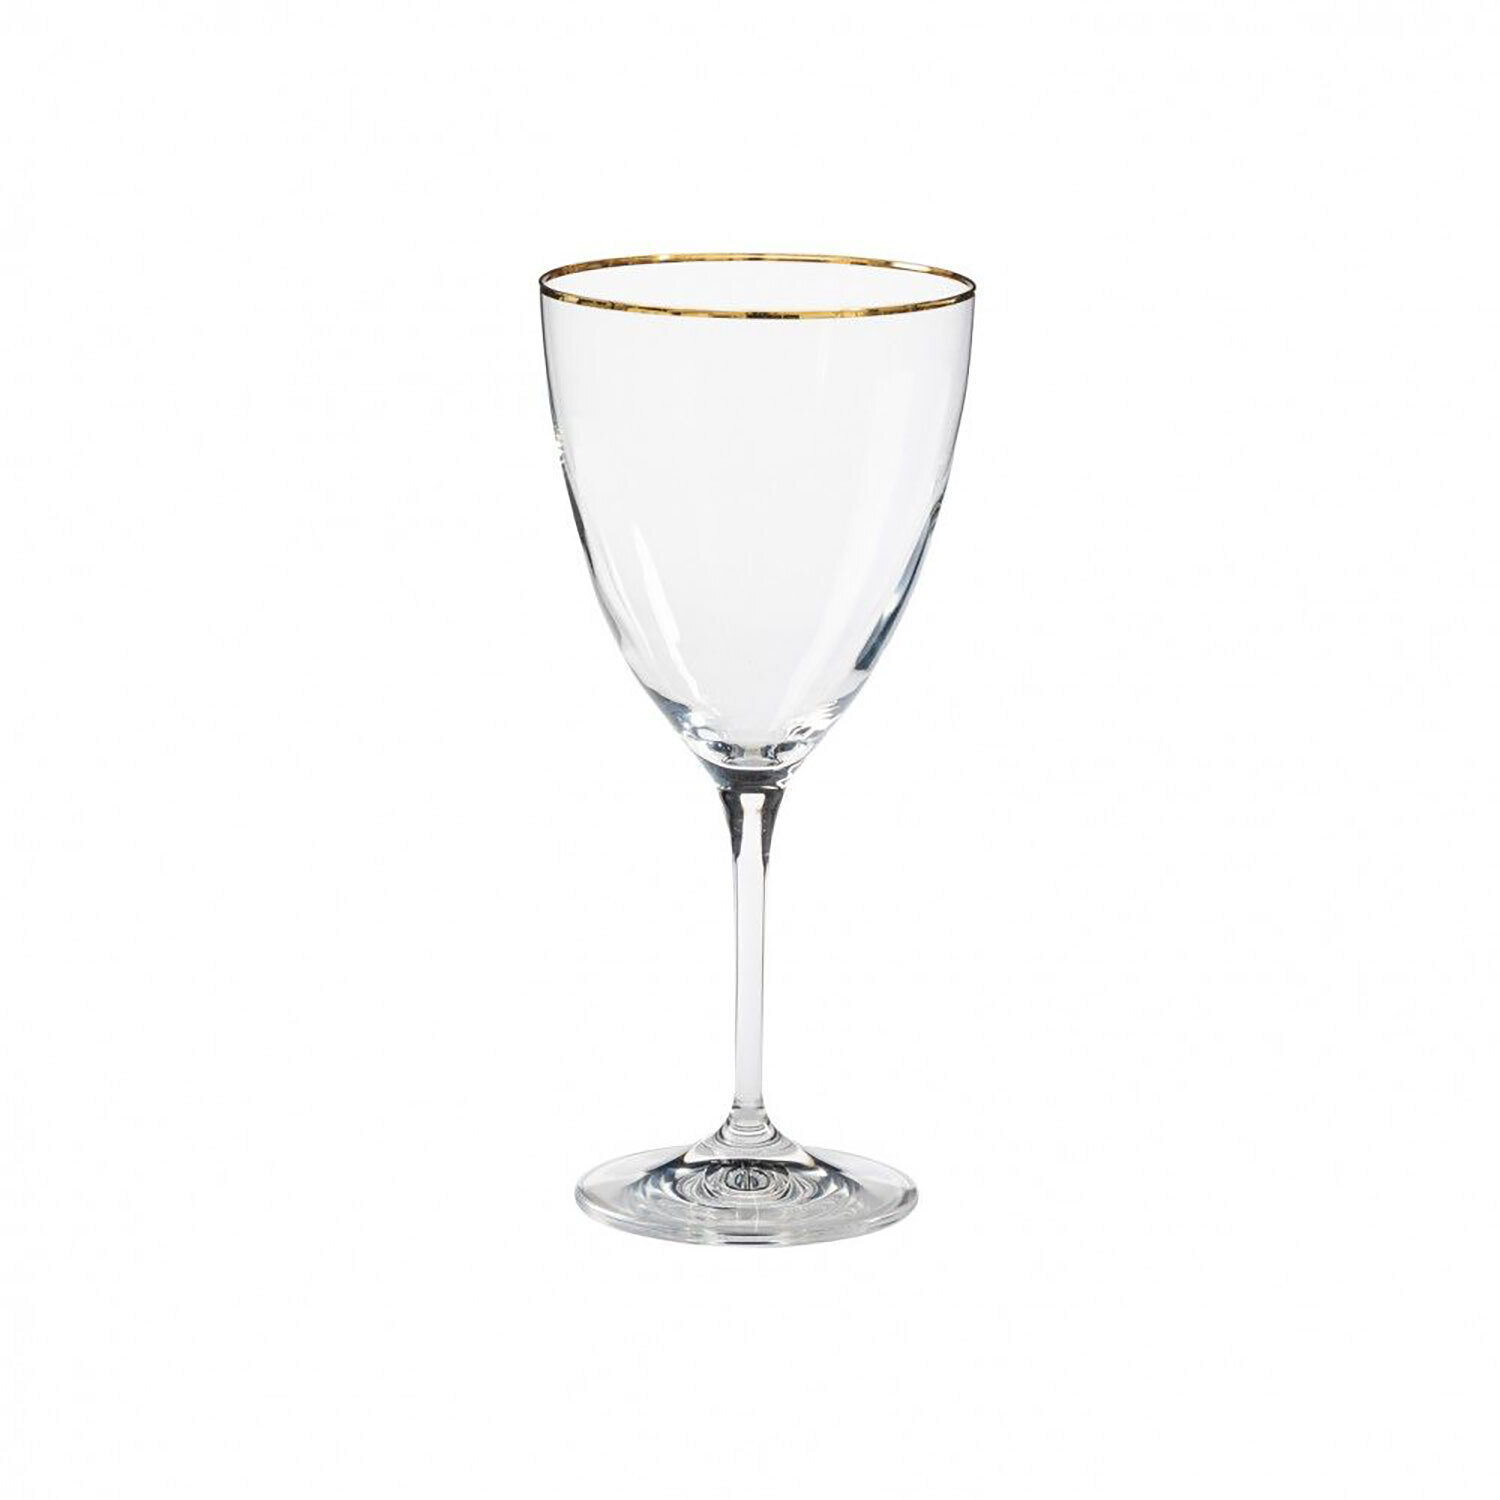 Casafina Sensa Clear With Golden Rim Water Glass with Gldn Rim 14Oz CFV0074-CGD Set of 6